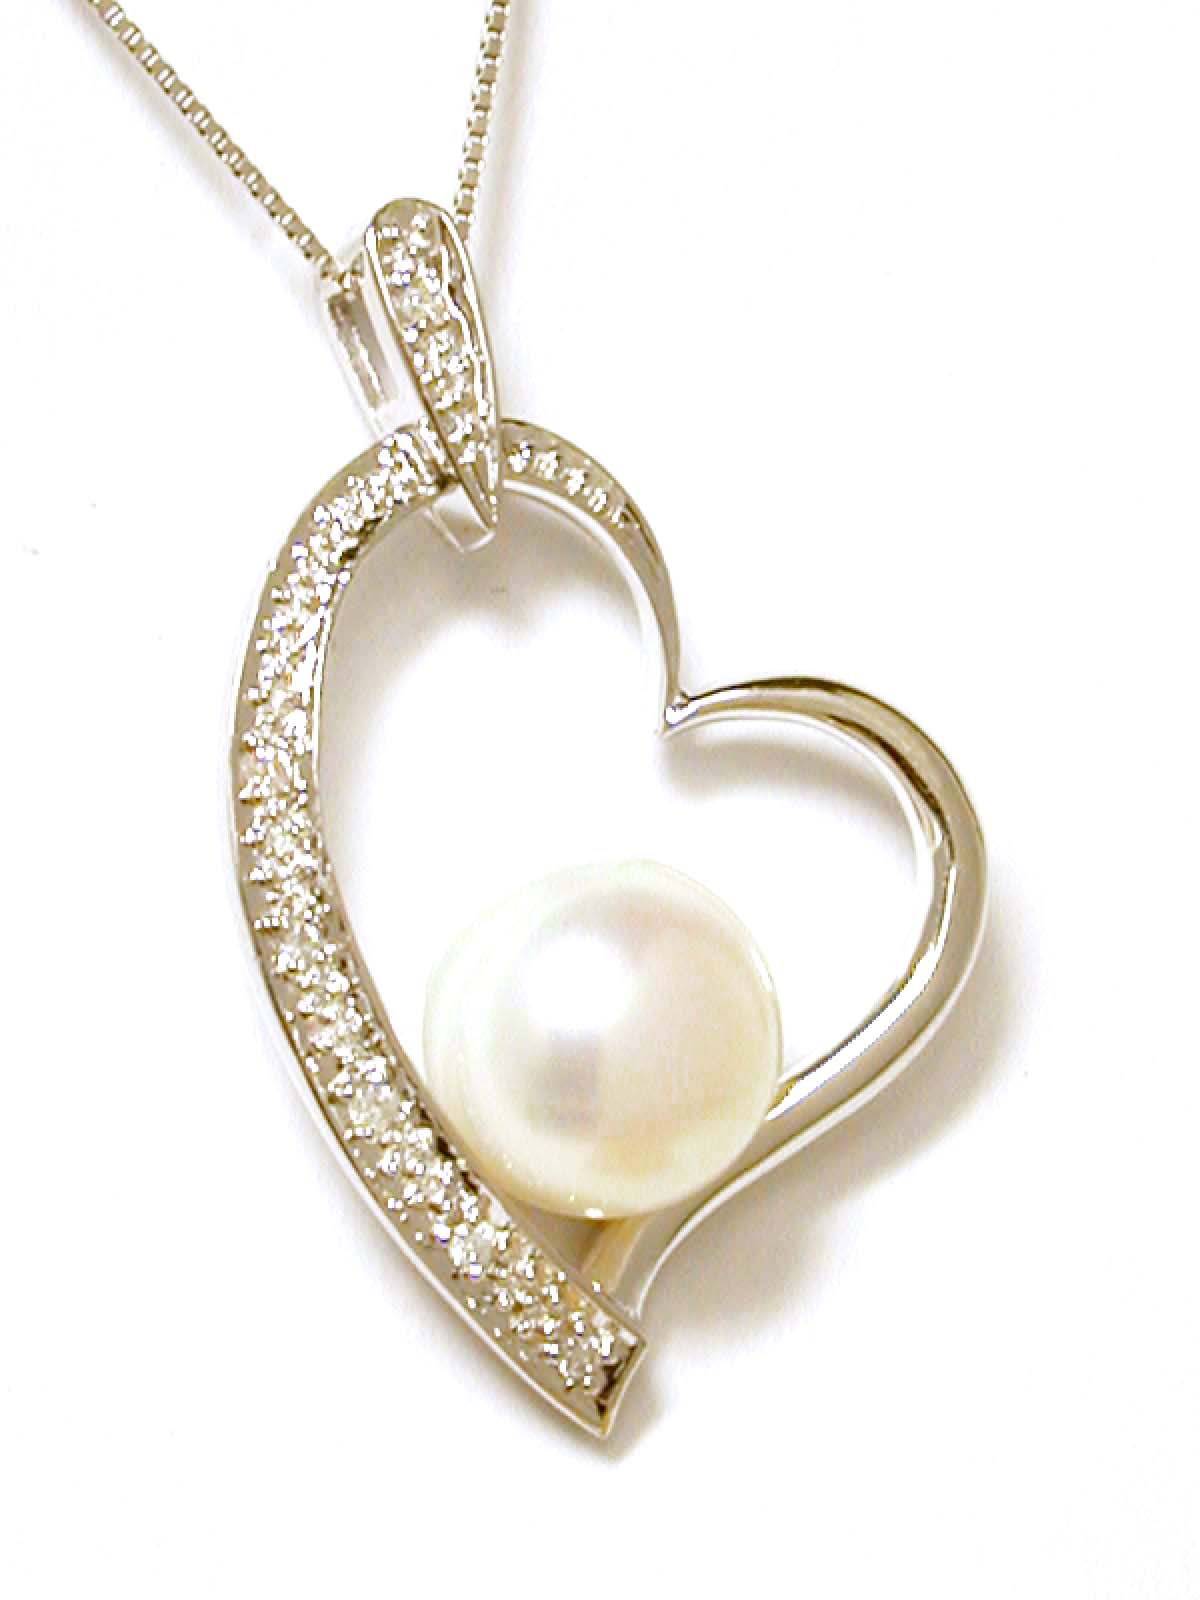 
Modern Freshwater Cultured Pearl and Diamond Heart Pendant
